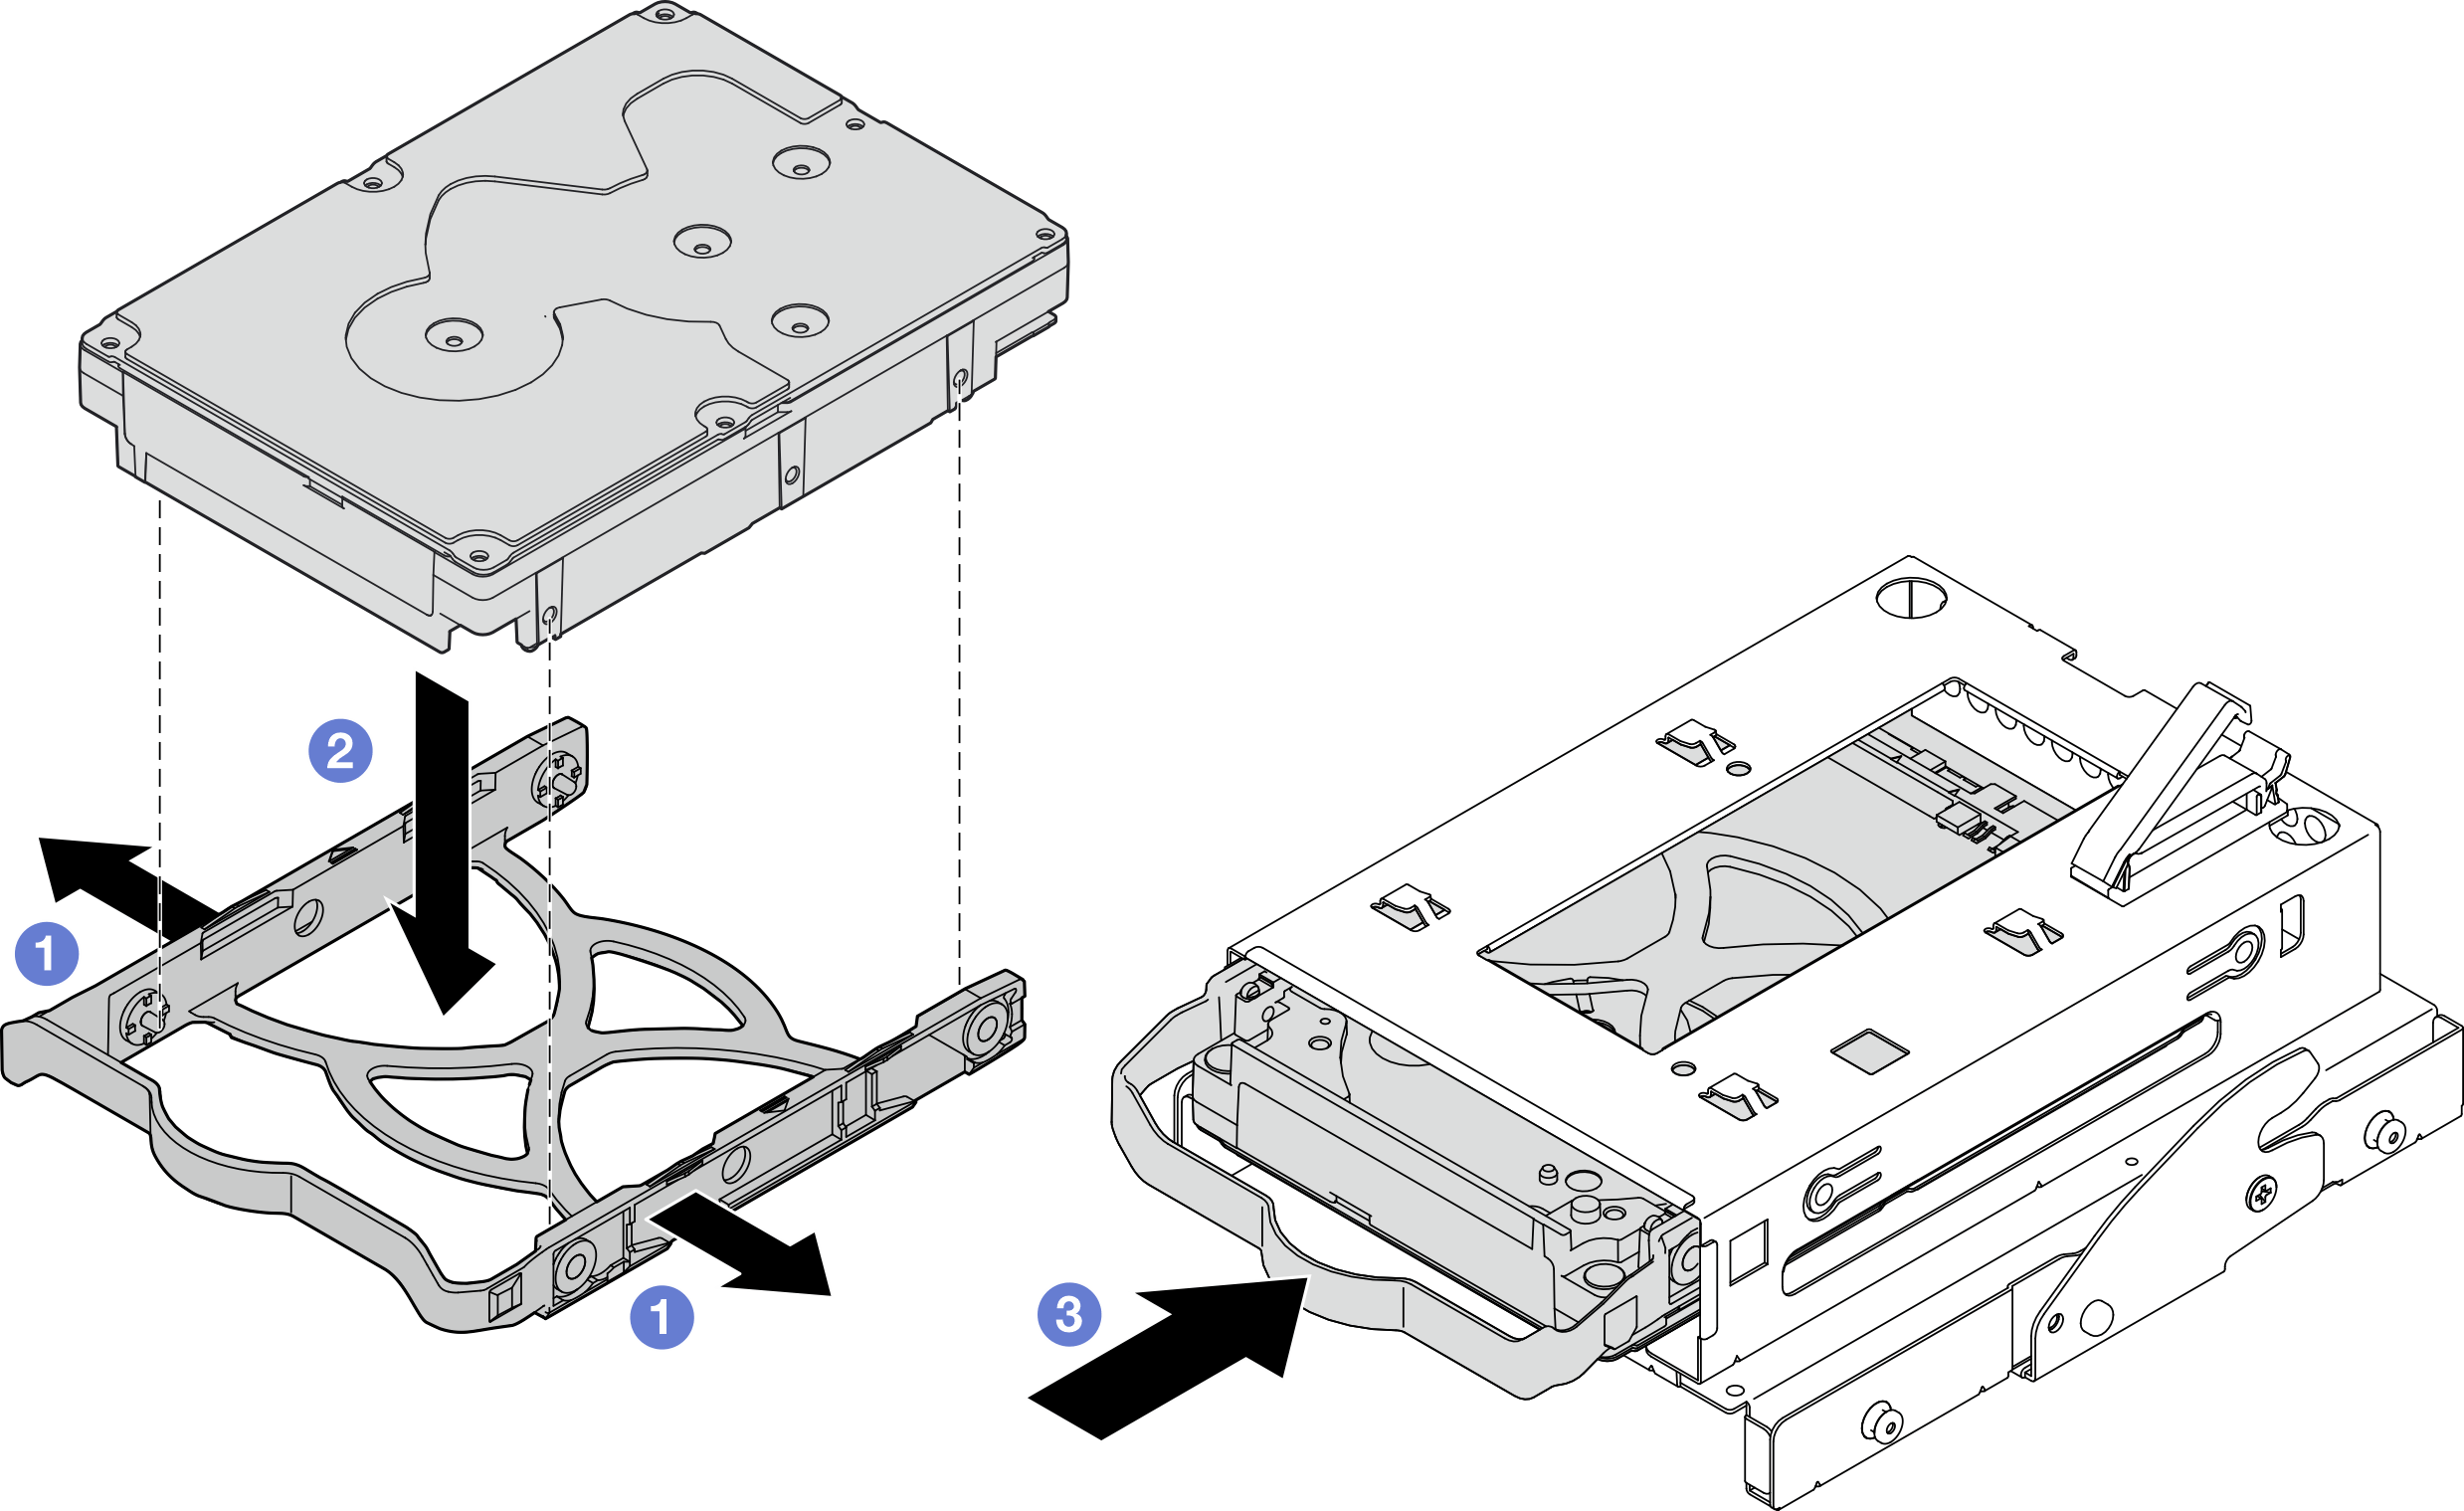 Installing a 3.5-inch drive to the drive cage